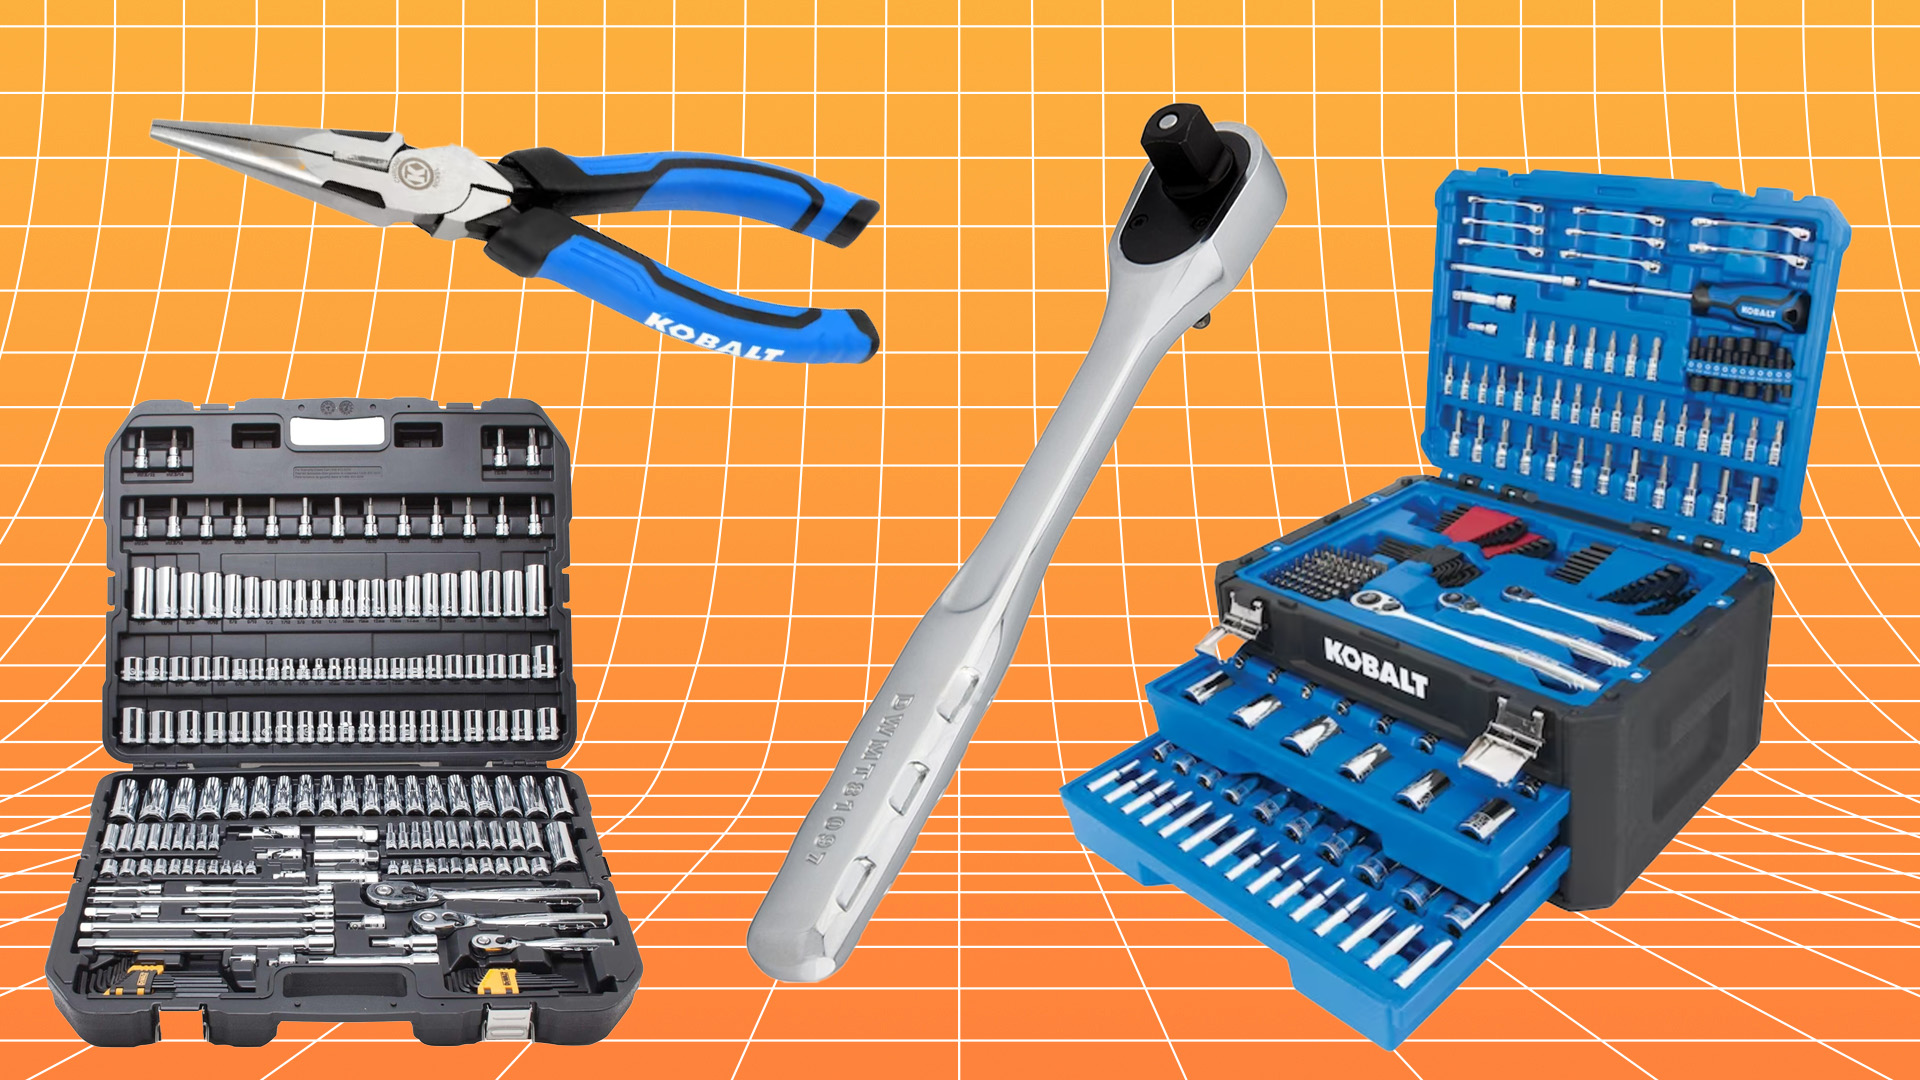 Cyber Monday Isn’t Over With Huge Discounts on the Best Mechanics Tools Sets